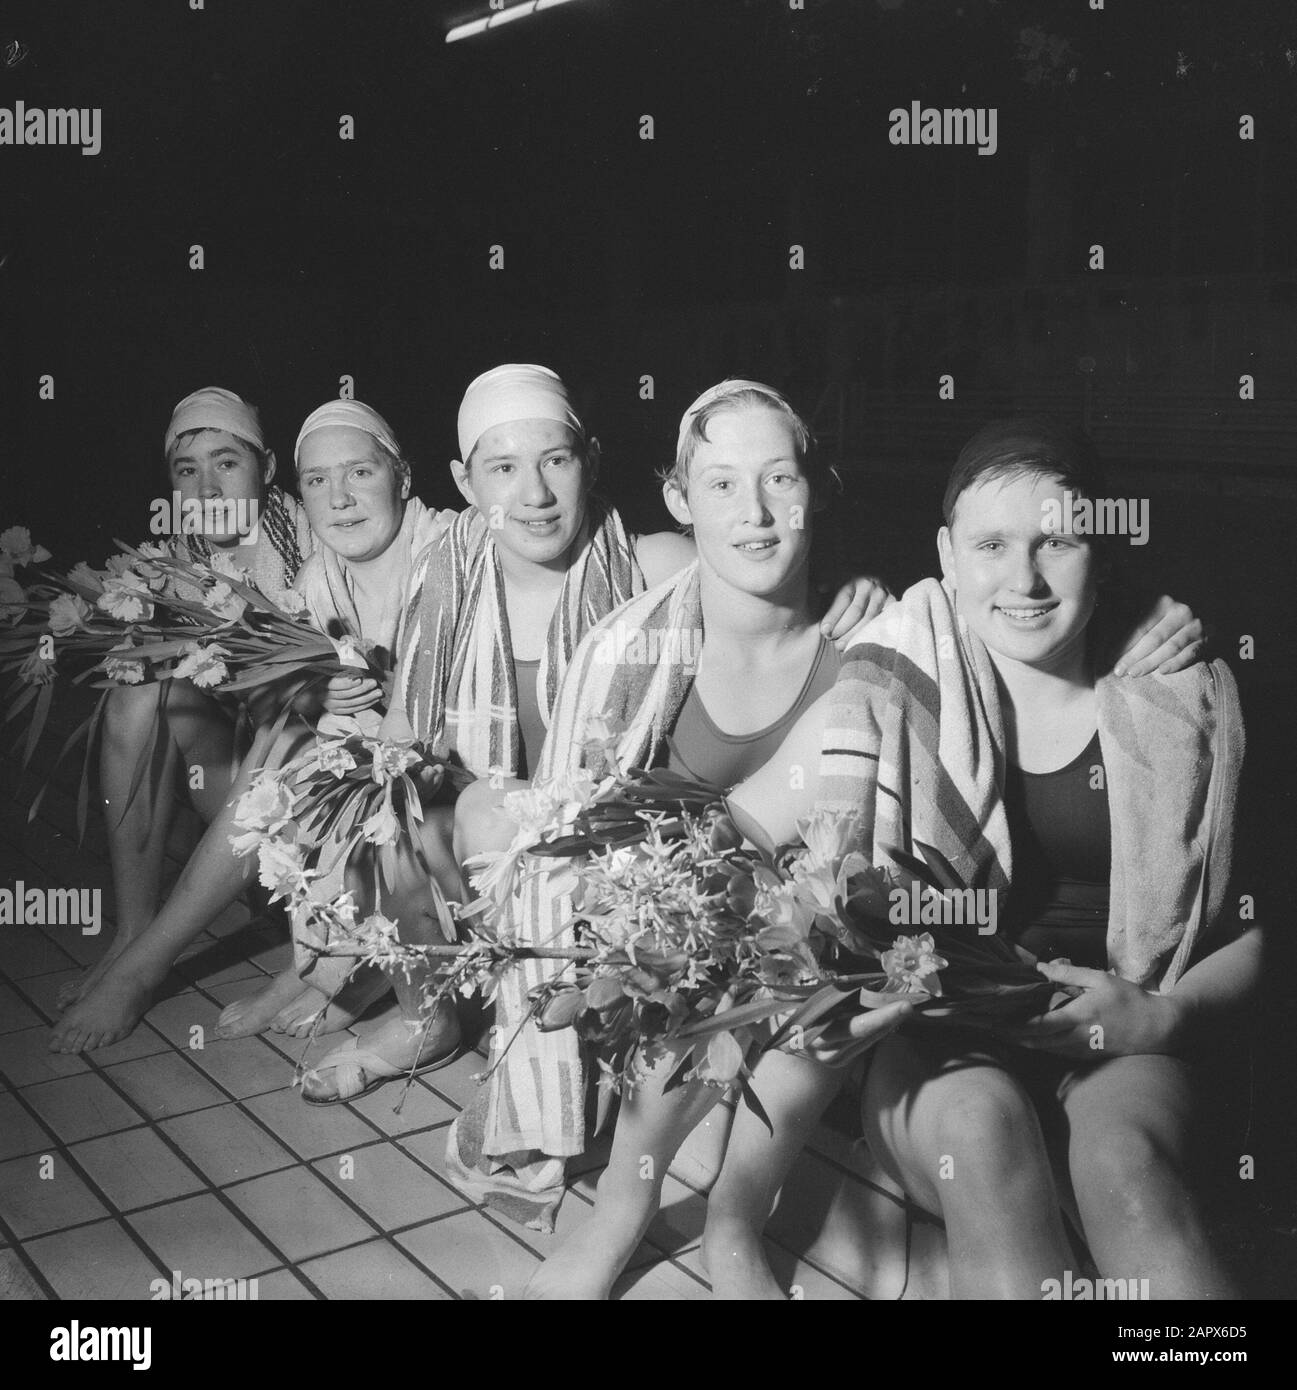 Improvement of two Dutch records by the swimming club Naarden, v.l.n.r. Adrie Lasterie, T. Lagerberg, Dini Koopman, Willy Lambour and Marianne Heemskerk Date: March 10, 1960 Keywords: Swimming clubs Personal name: Heemskerk, Marianne, Koopman, Dinie, Lambour, Willy, Lasterie, Adrie, Zagerberg, T. Stock Photo